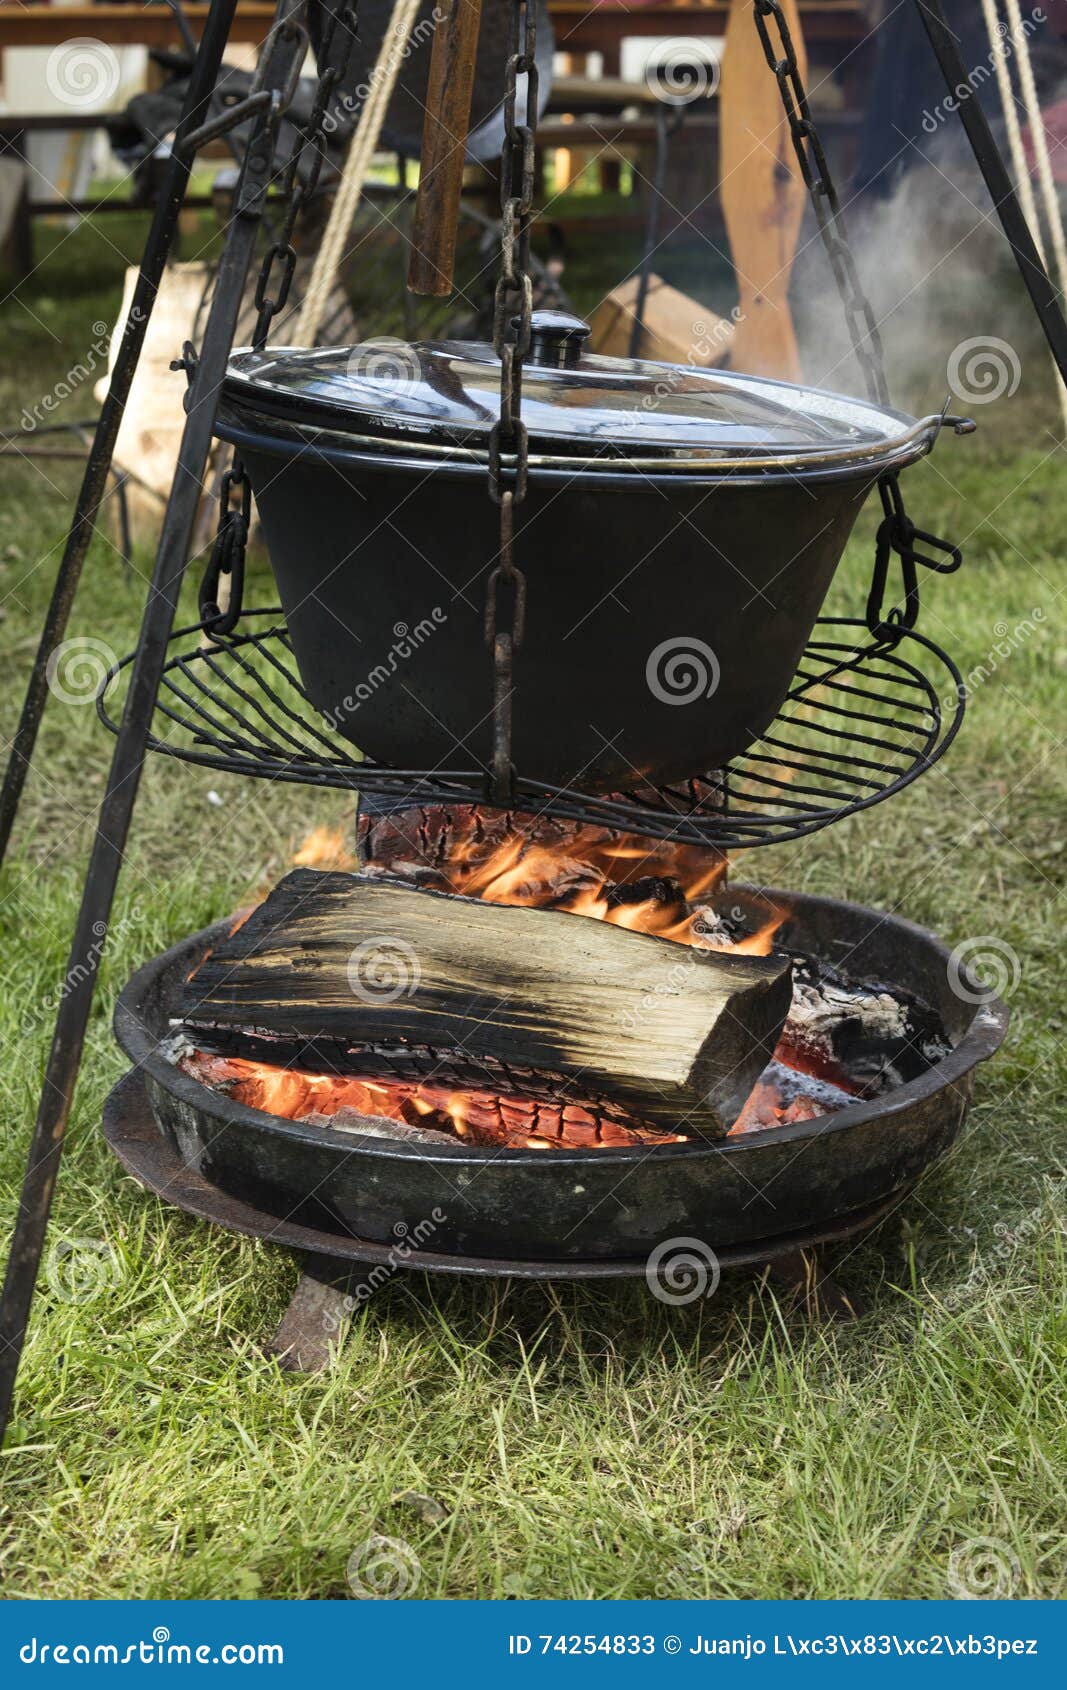 https://thumbs.dreamstime.com/z/big-cooking-pot-placed-fire-camping-outdoors-74254833.jpg